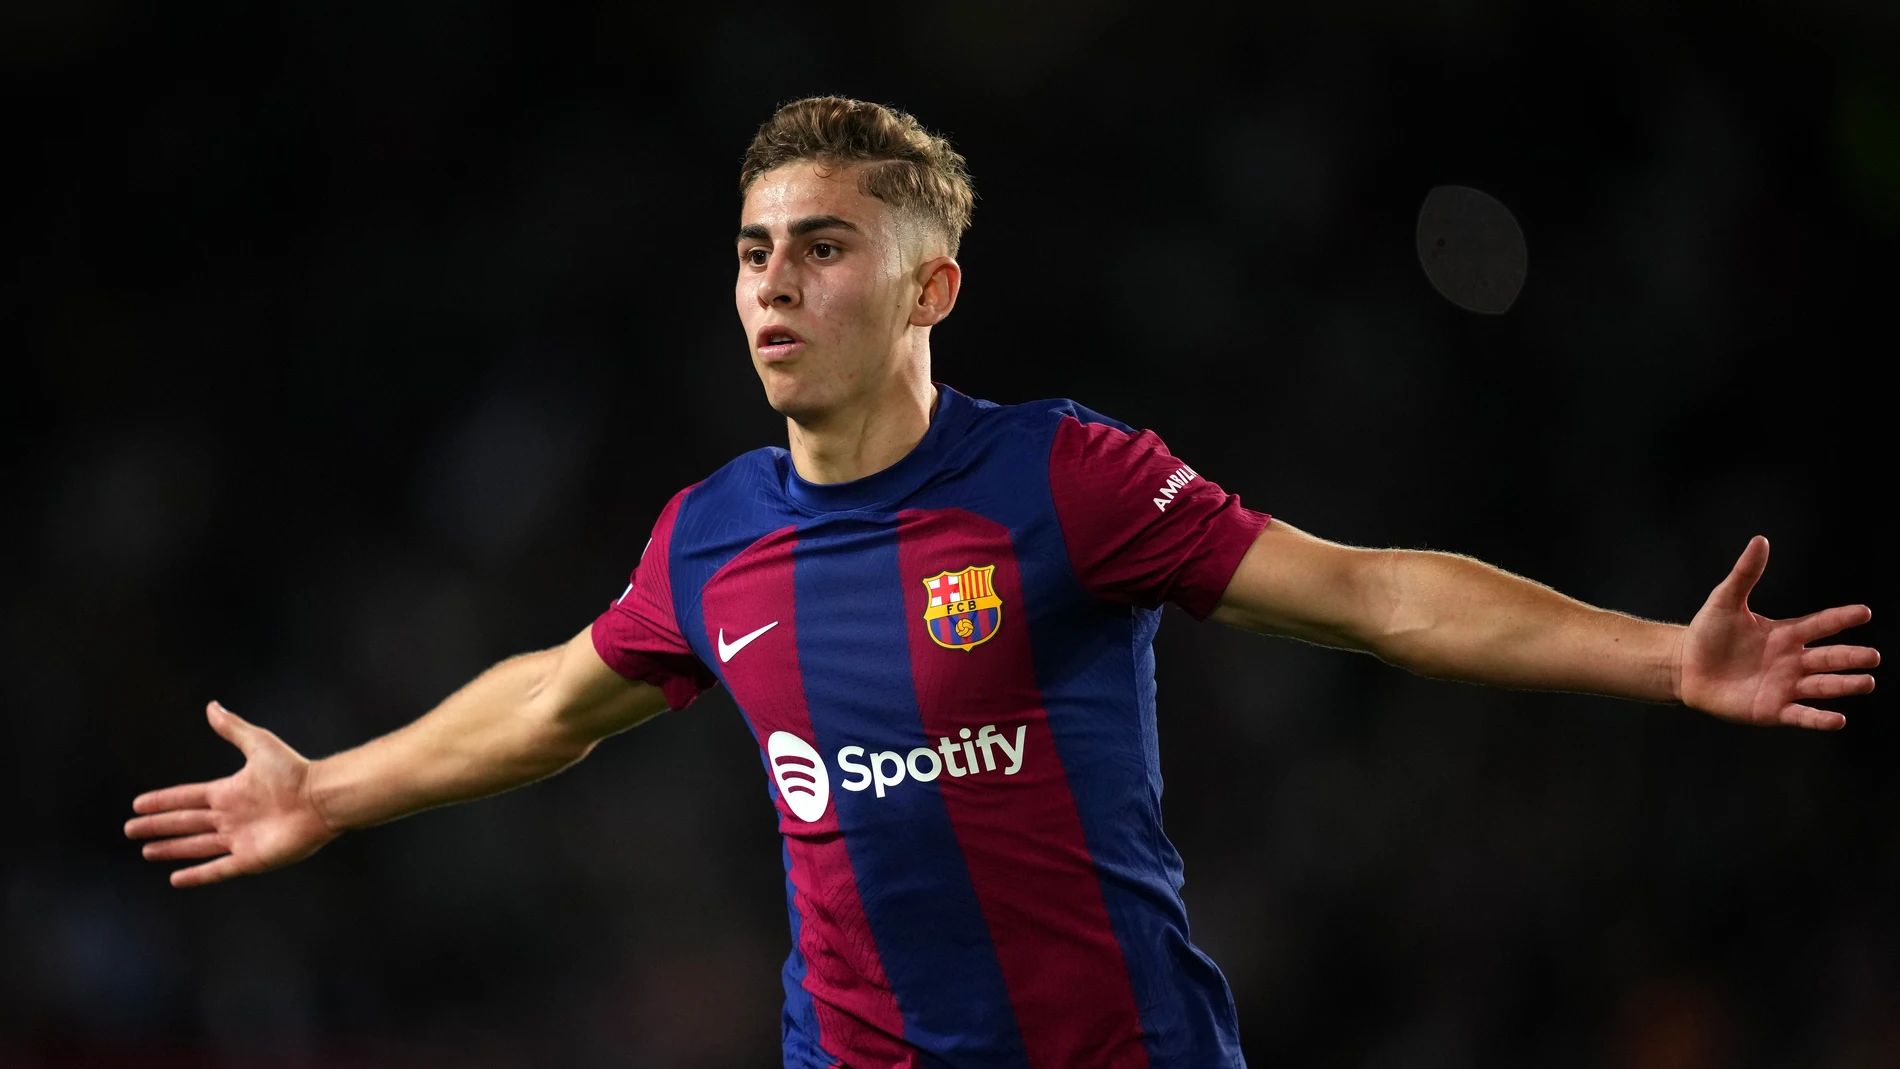 Barcelona starlet responds to rumours of Manchester United interest – “I’m not very interested”